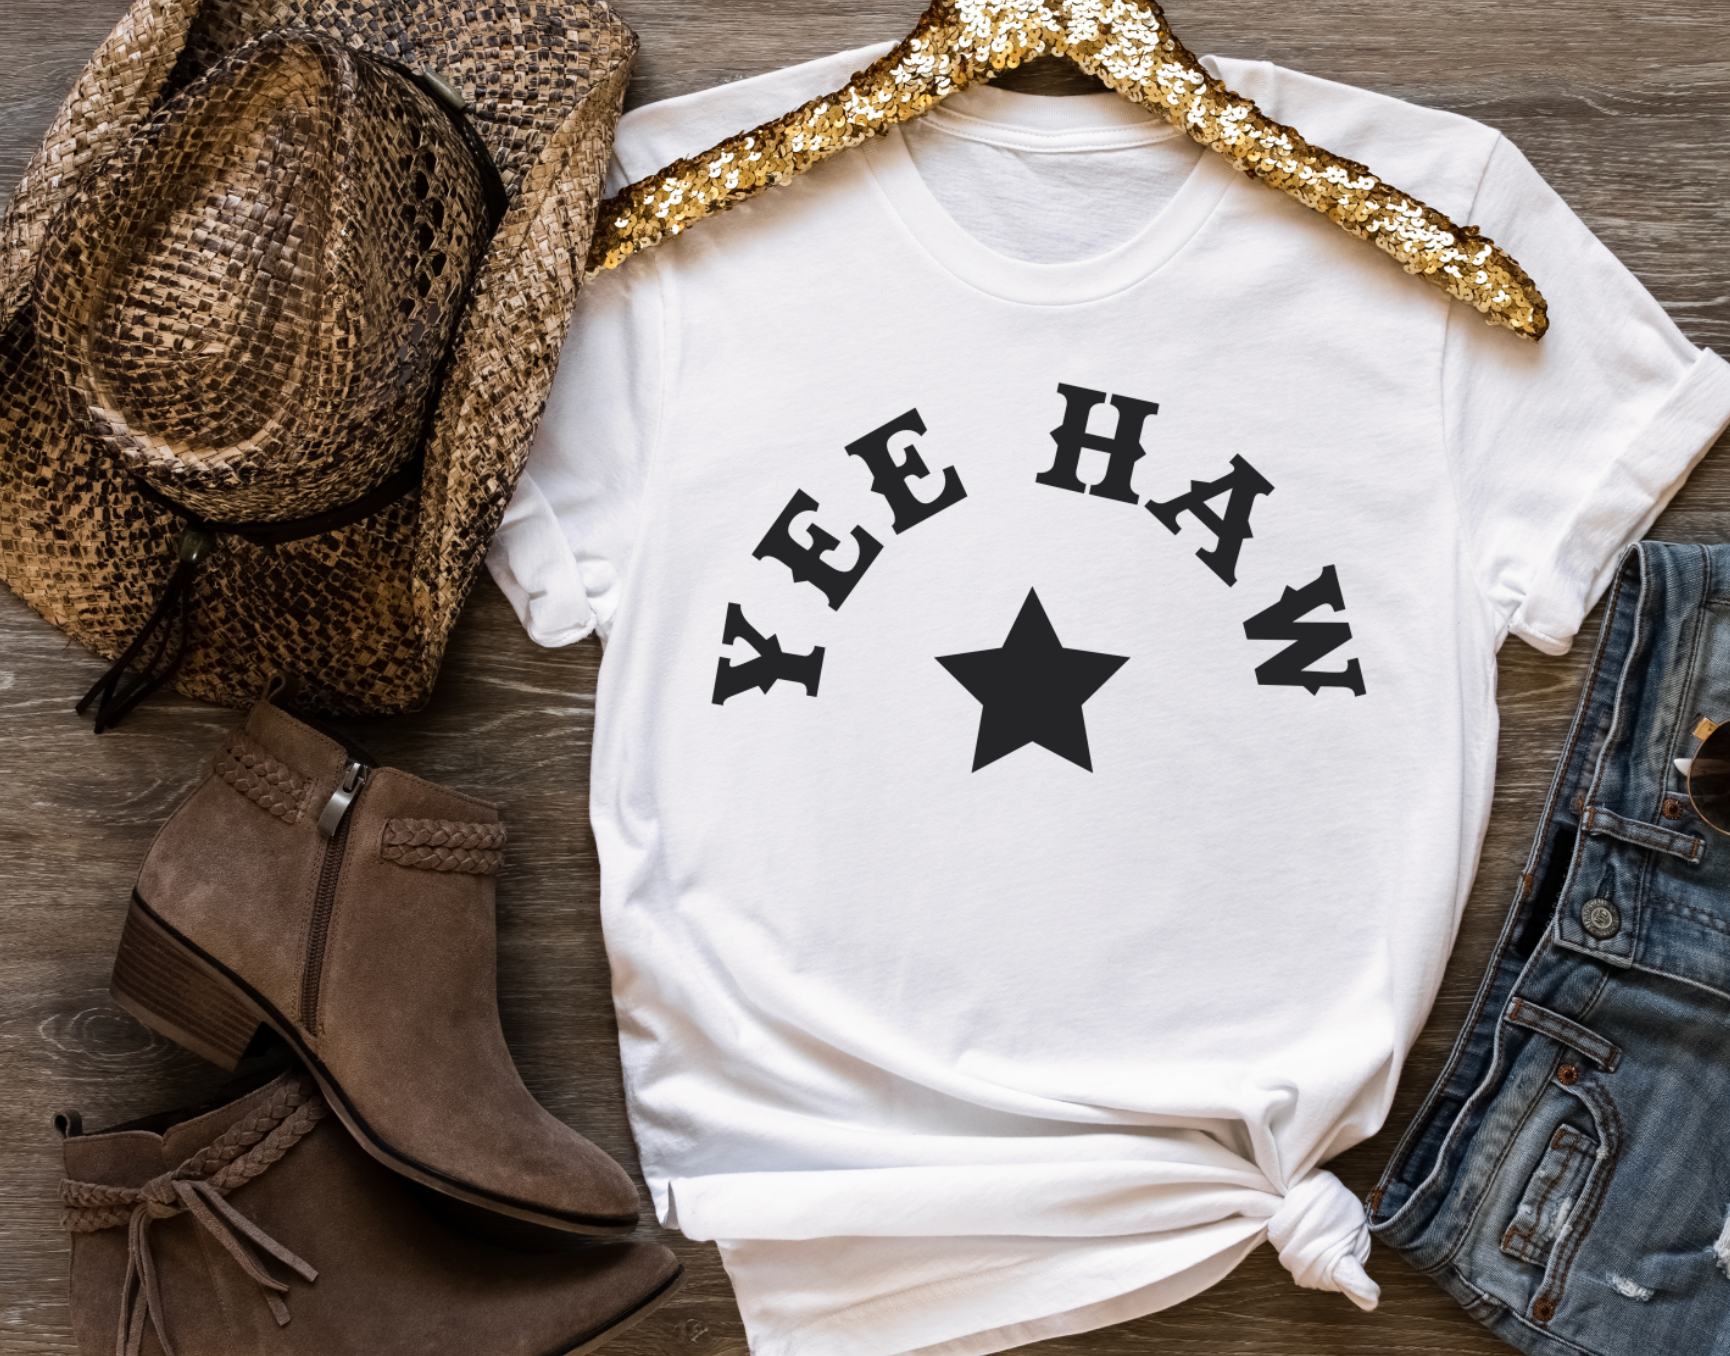 Yee Haw Vintage Country Western Girl Bella and Canvas tshirt. Shipped from Texas. Color is White.